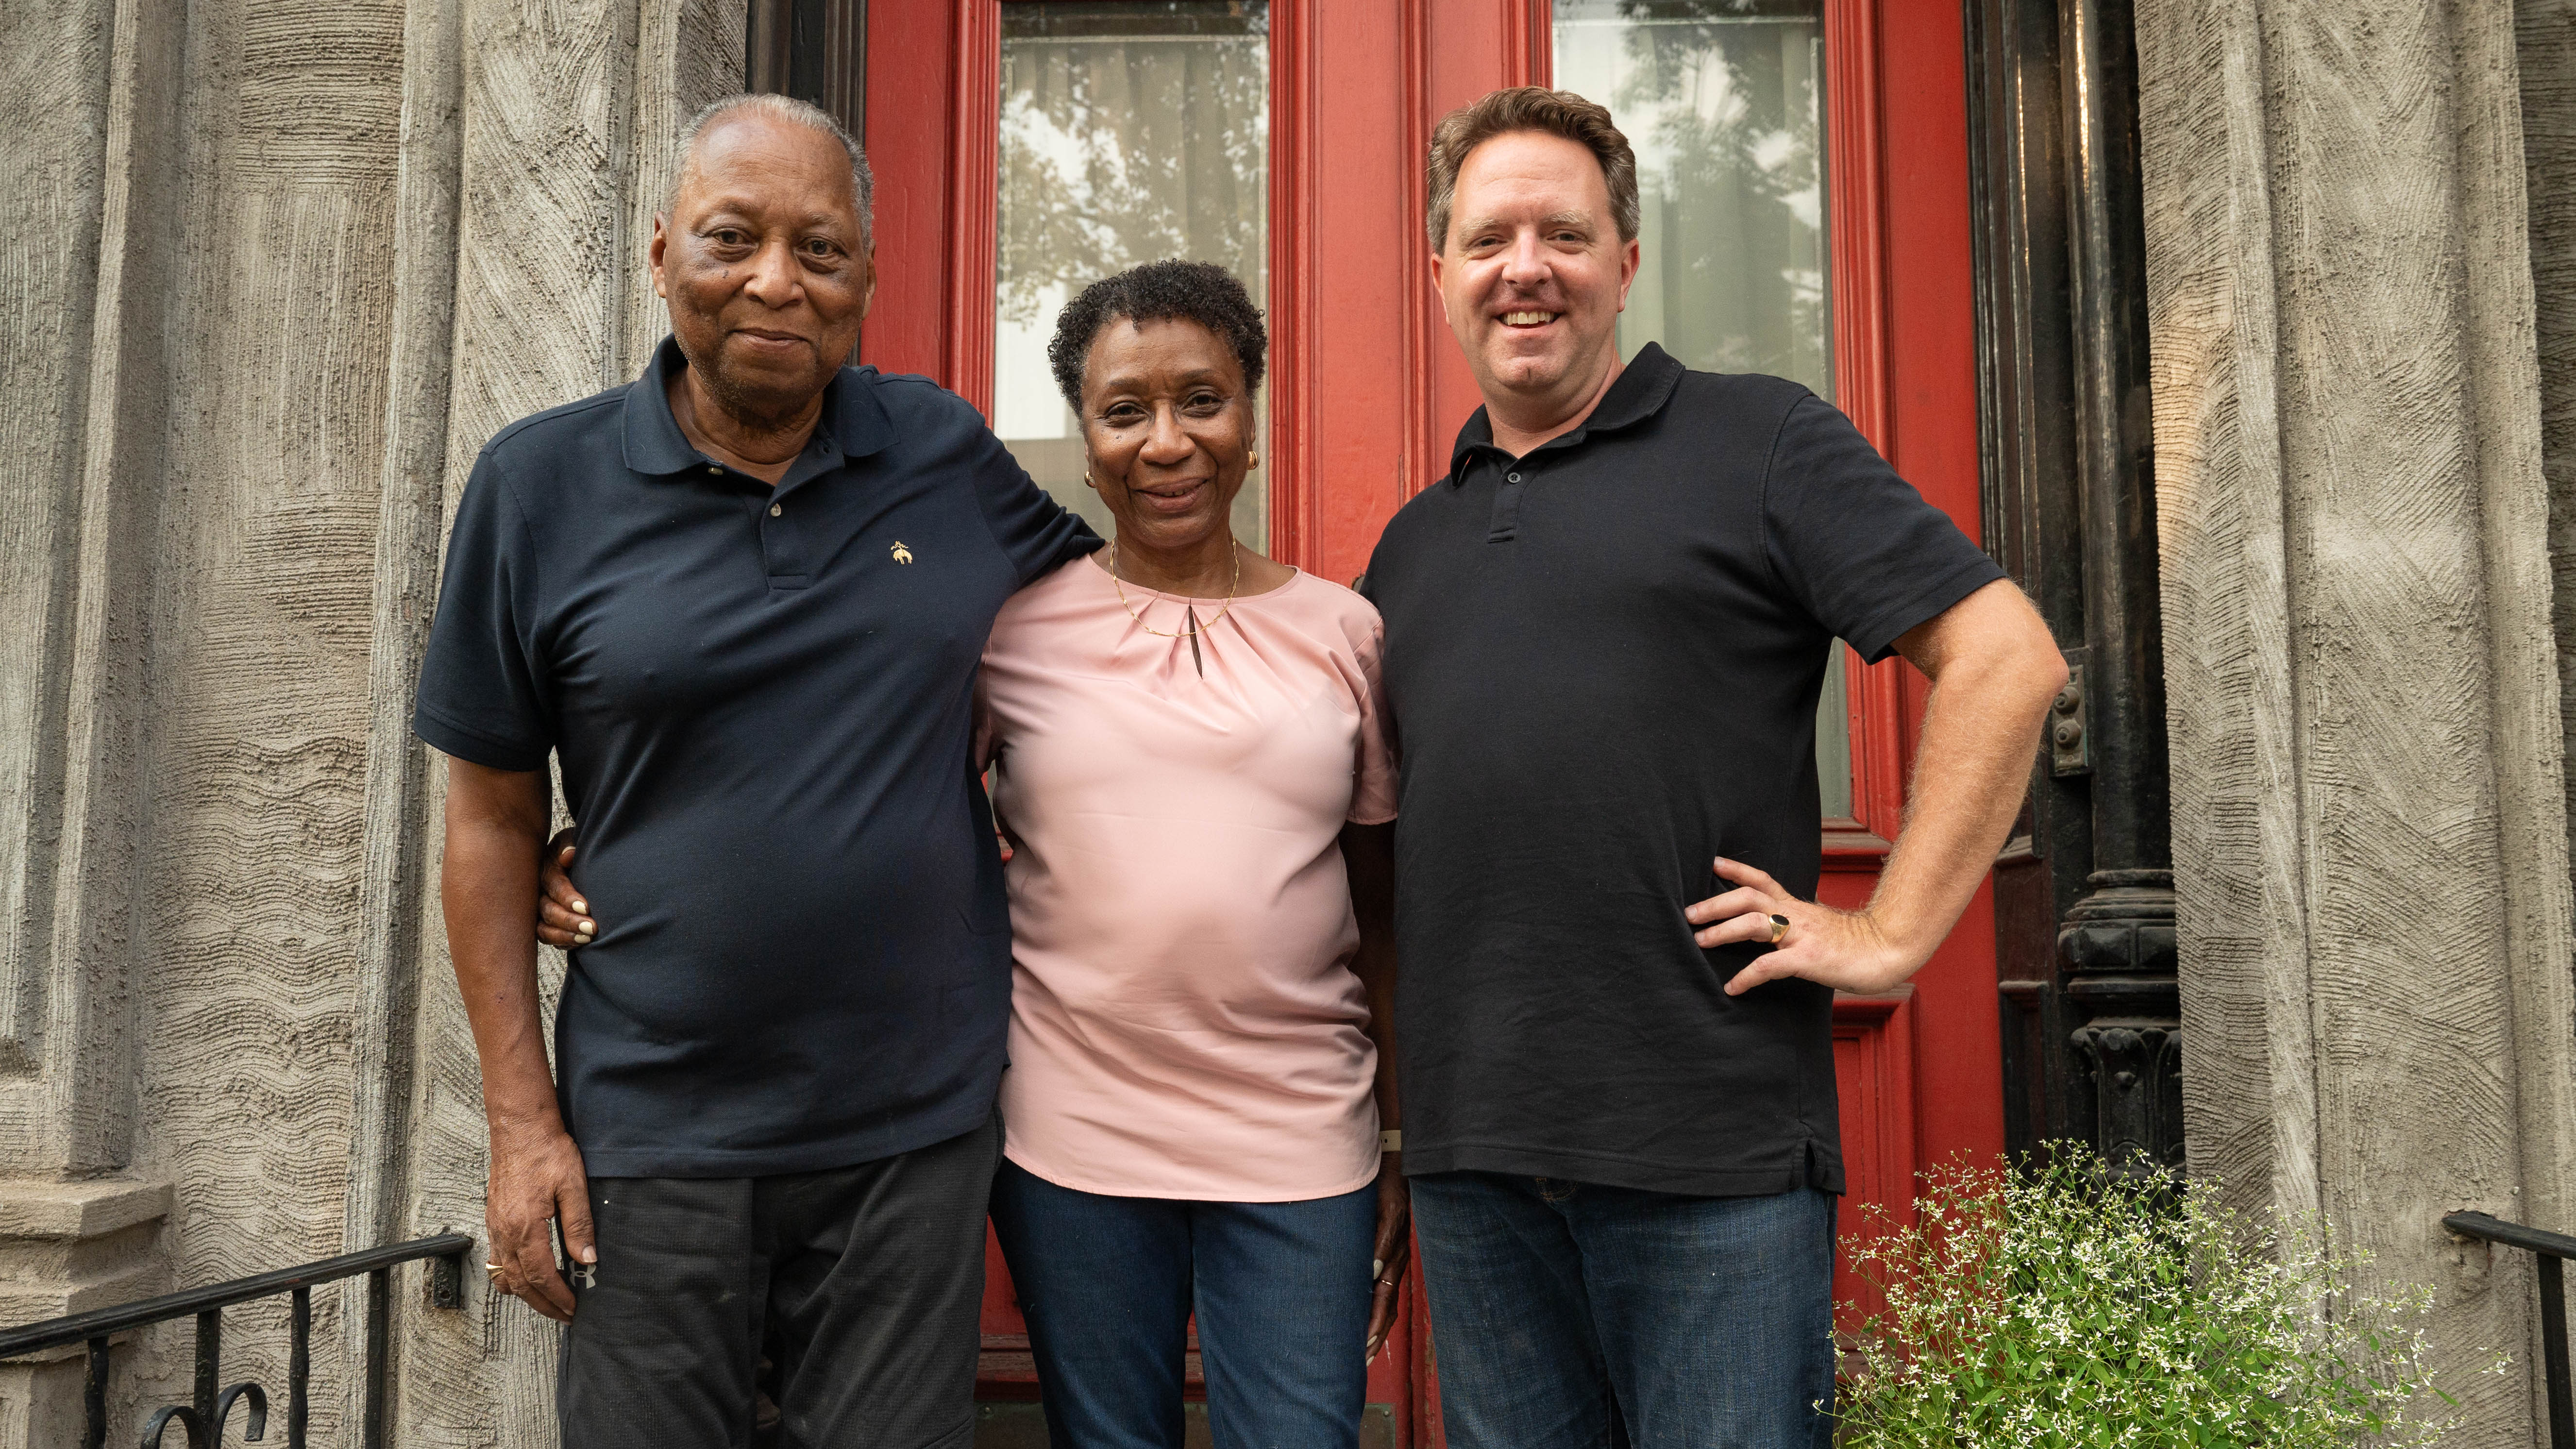 Richard and Ann, longtime Brooklyn residents, in front of their brownstone with Matt. Courtesy of VPM.